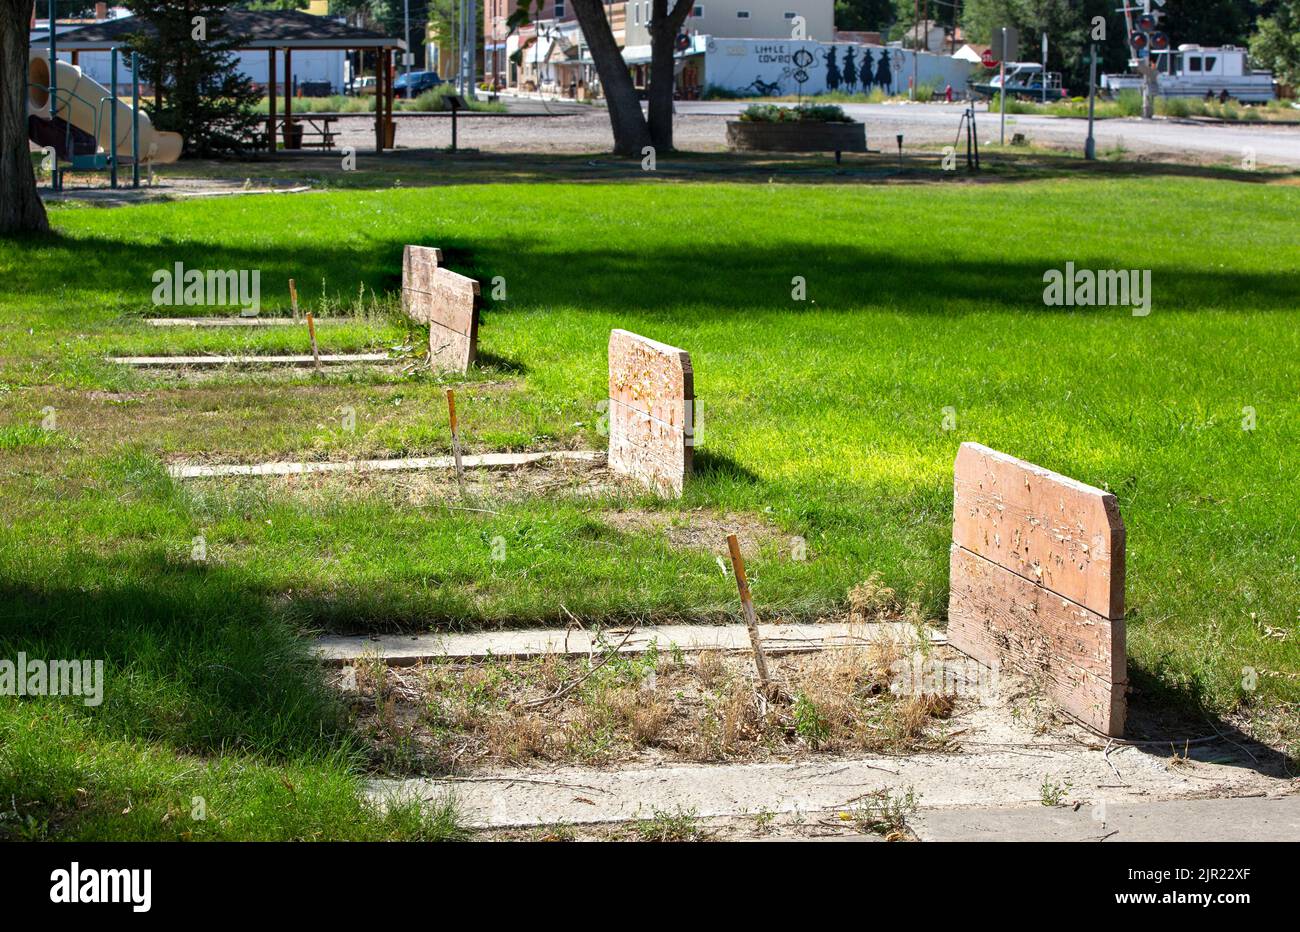 Weeds growing in unused horseshoe pits formerly used for recreation and games in a city park in Fromberg, Montana Stock Photo